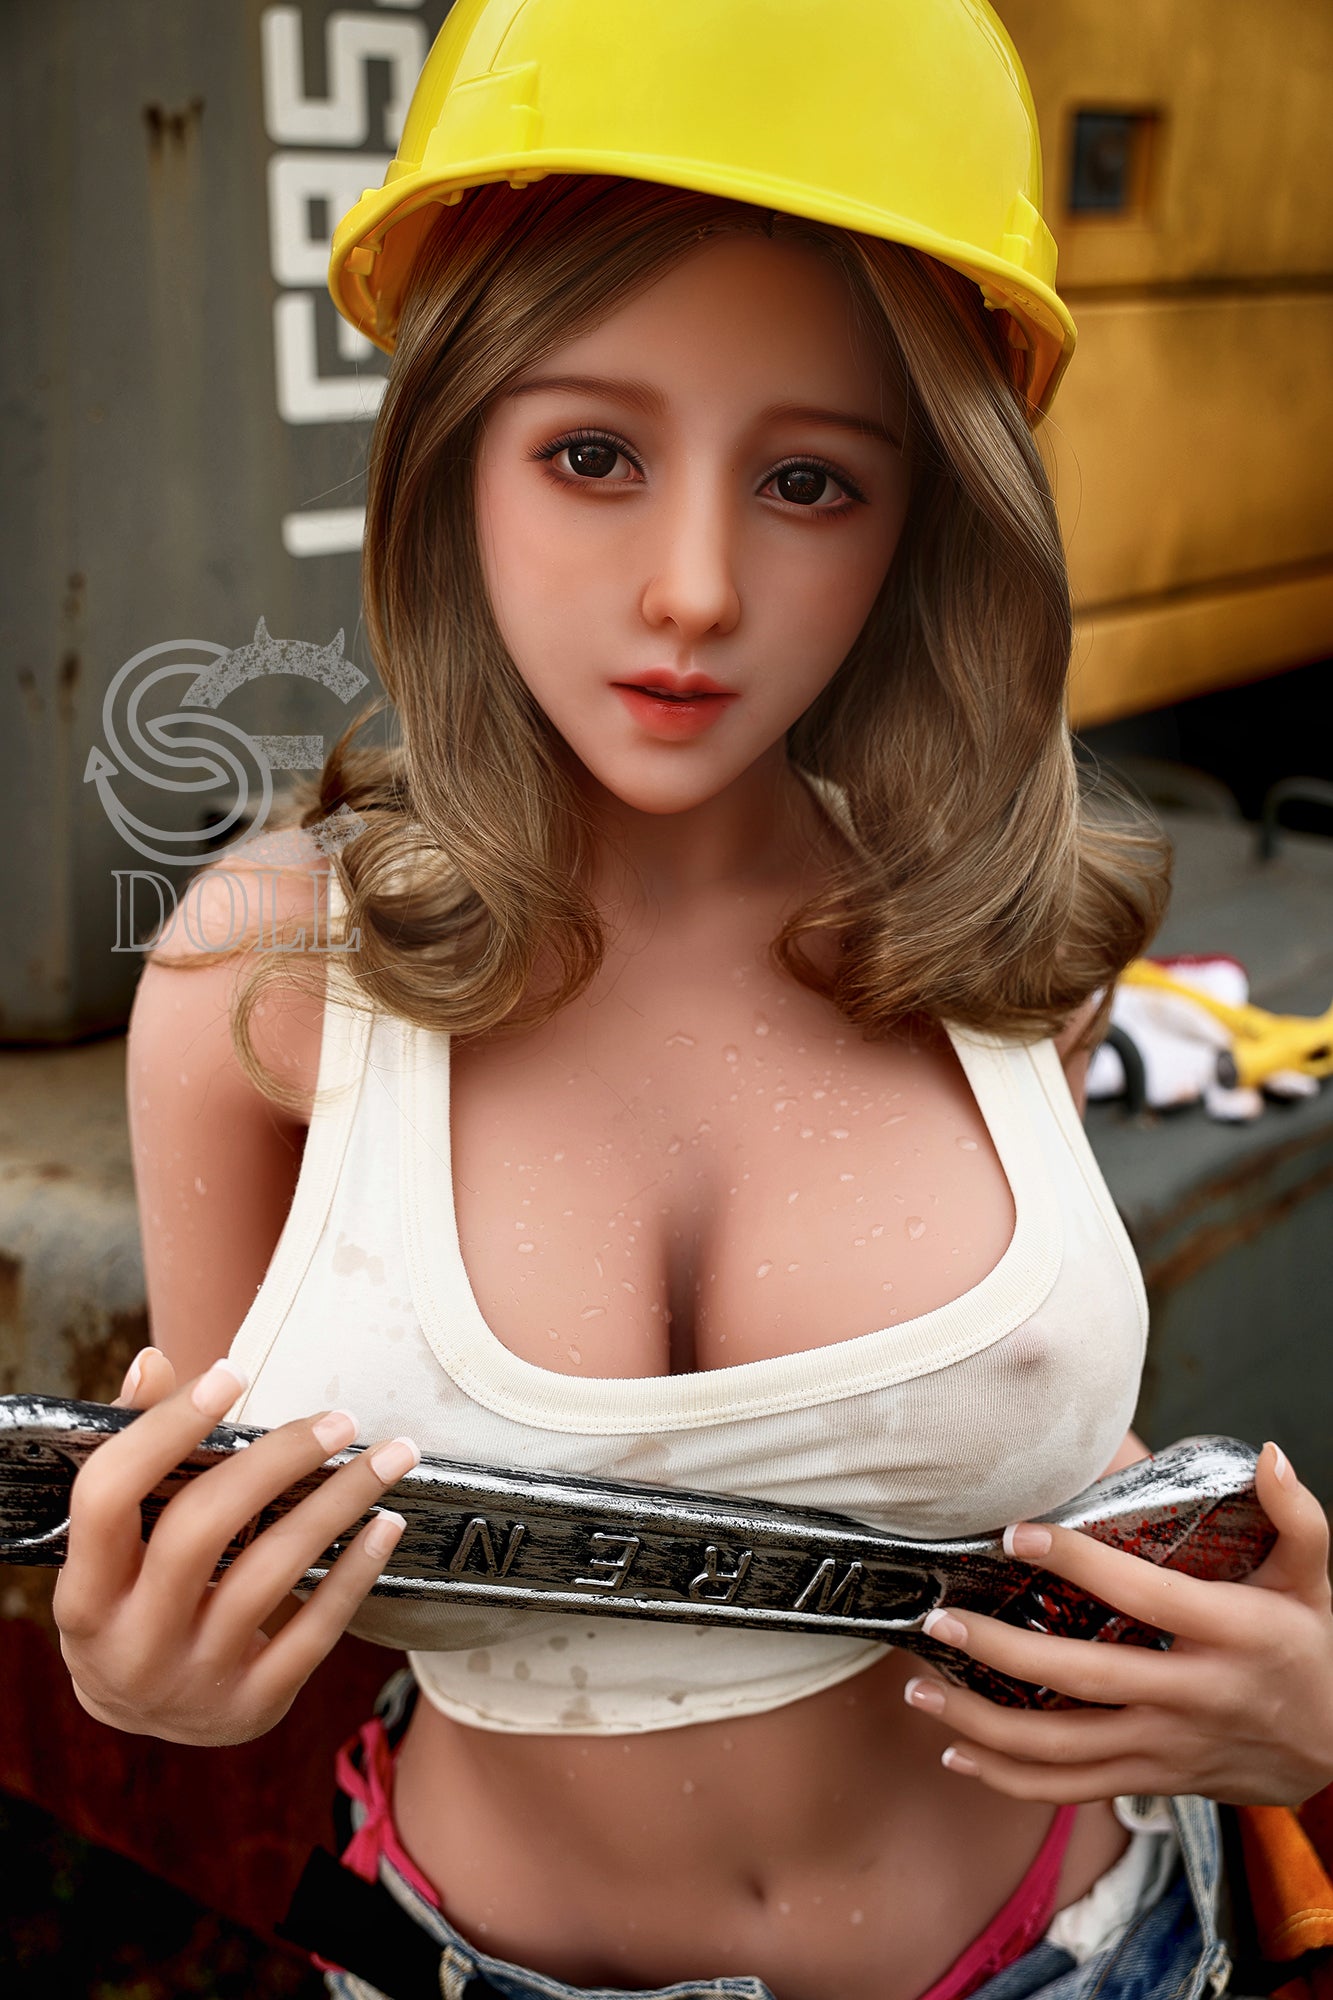 SEDOLL 157 cm H TPE - Eunice | Buy Sex Dolls at DOLLS ACTUALLY